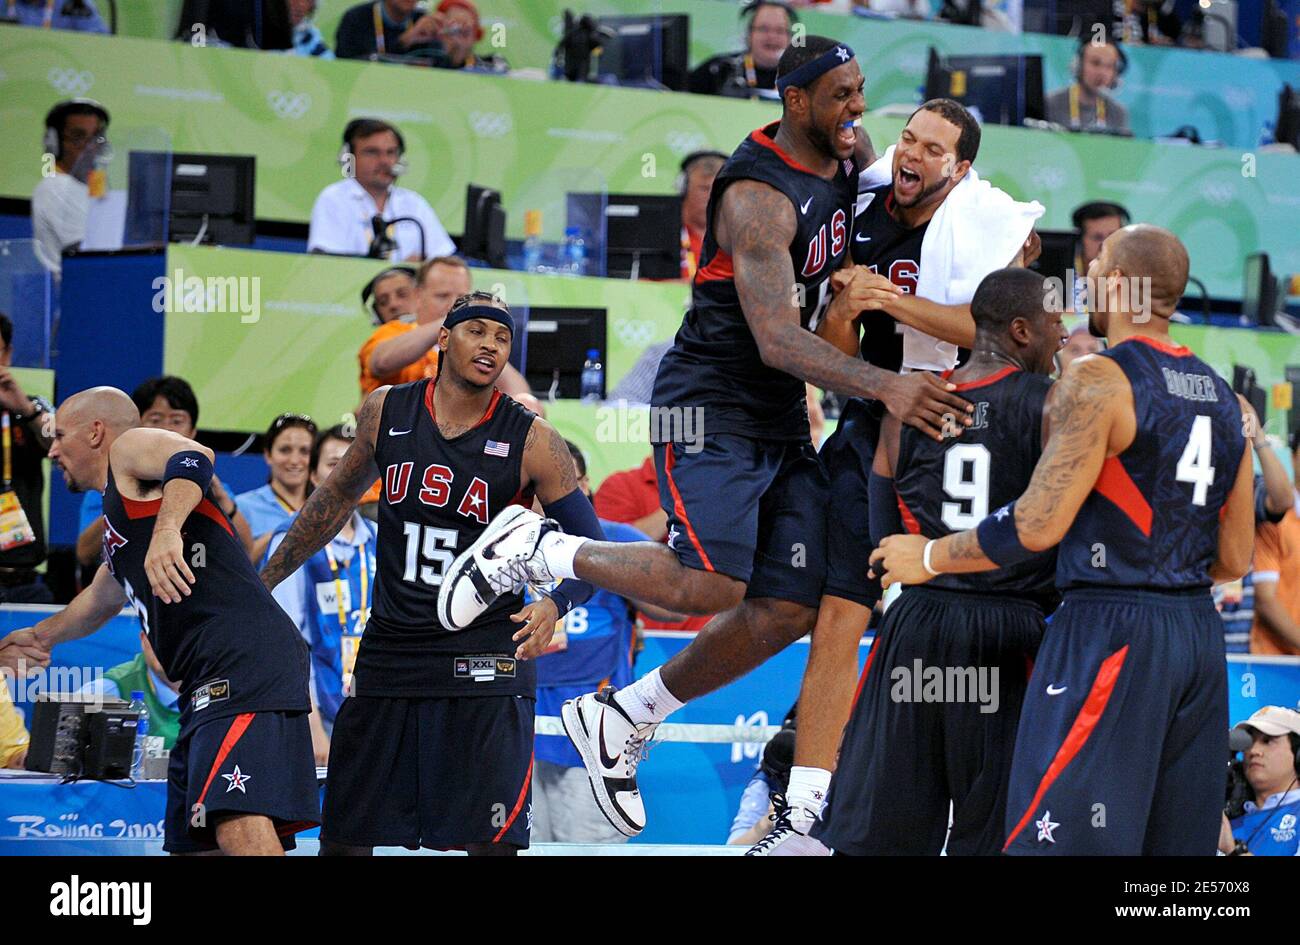 USA's basketball team during the Men's Basketball Final, USA vs Spain at  the Beijing 2008 Olympics in Beijing, China on August 24, 2008. USA won  118-107. Photo by Gouhier-Hahn-Nebinger/Cameleon/ABACAPRESS.COM Stock Photo  -